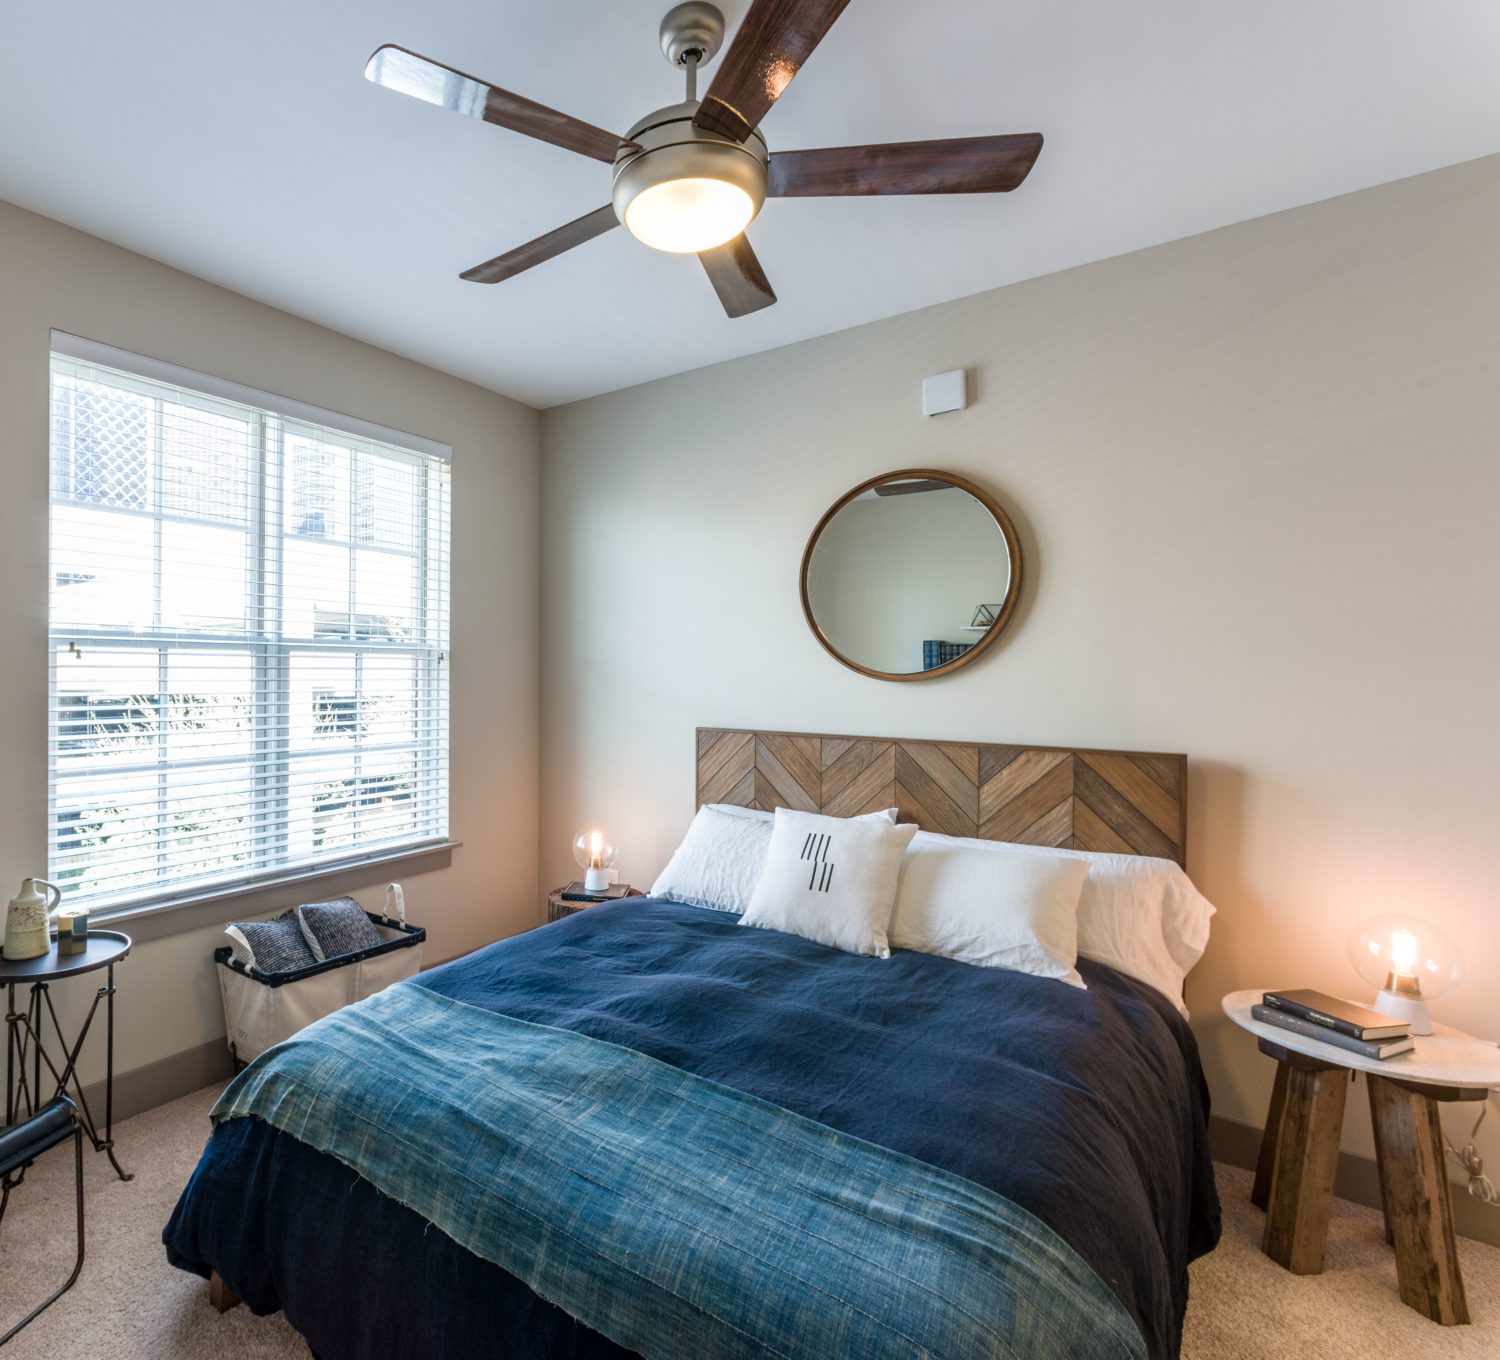 Bedroom with large windows and ceiling fan